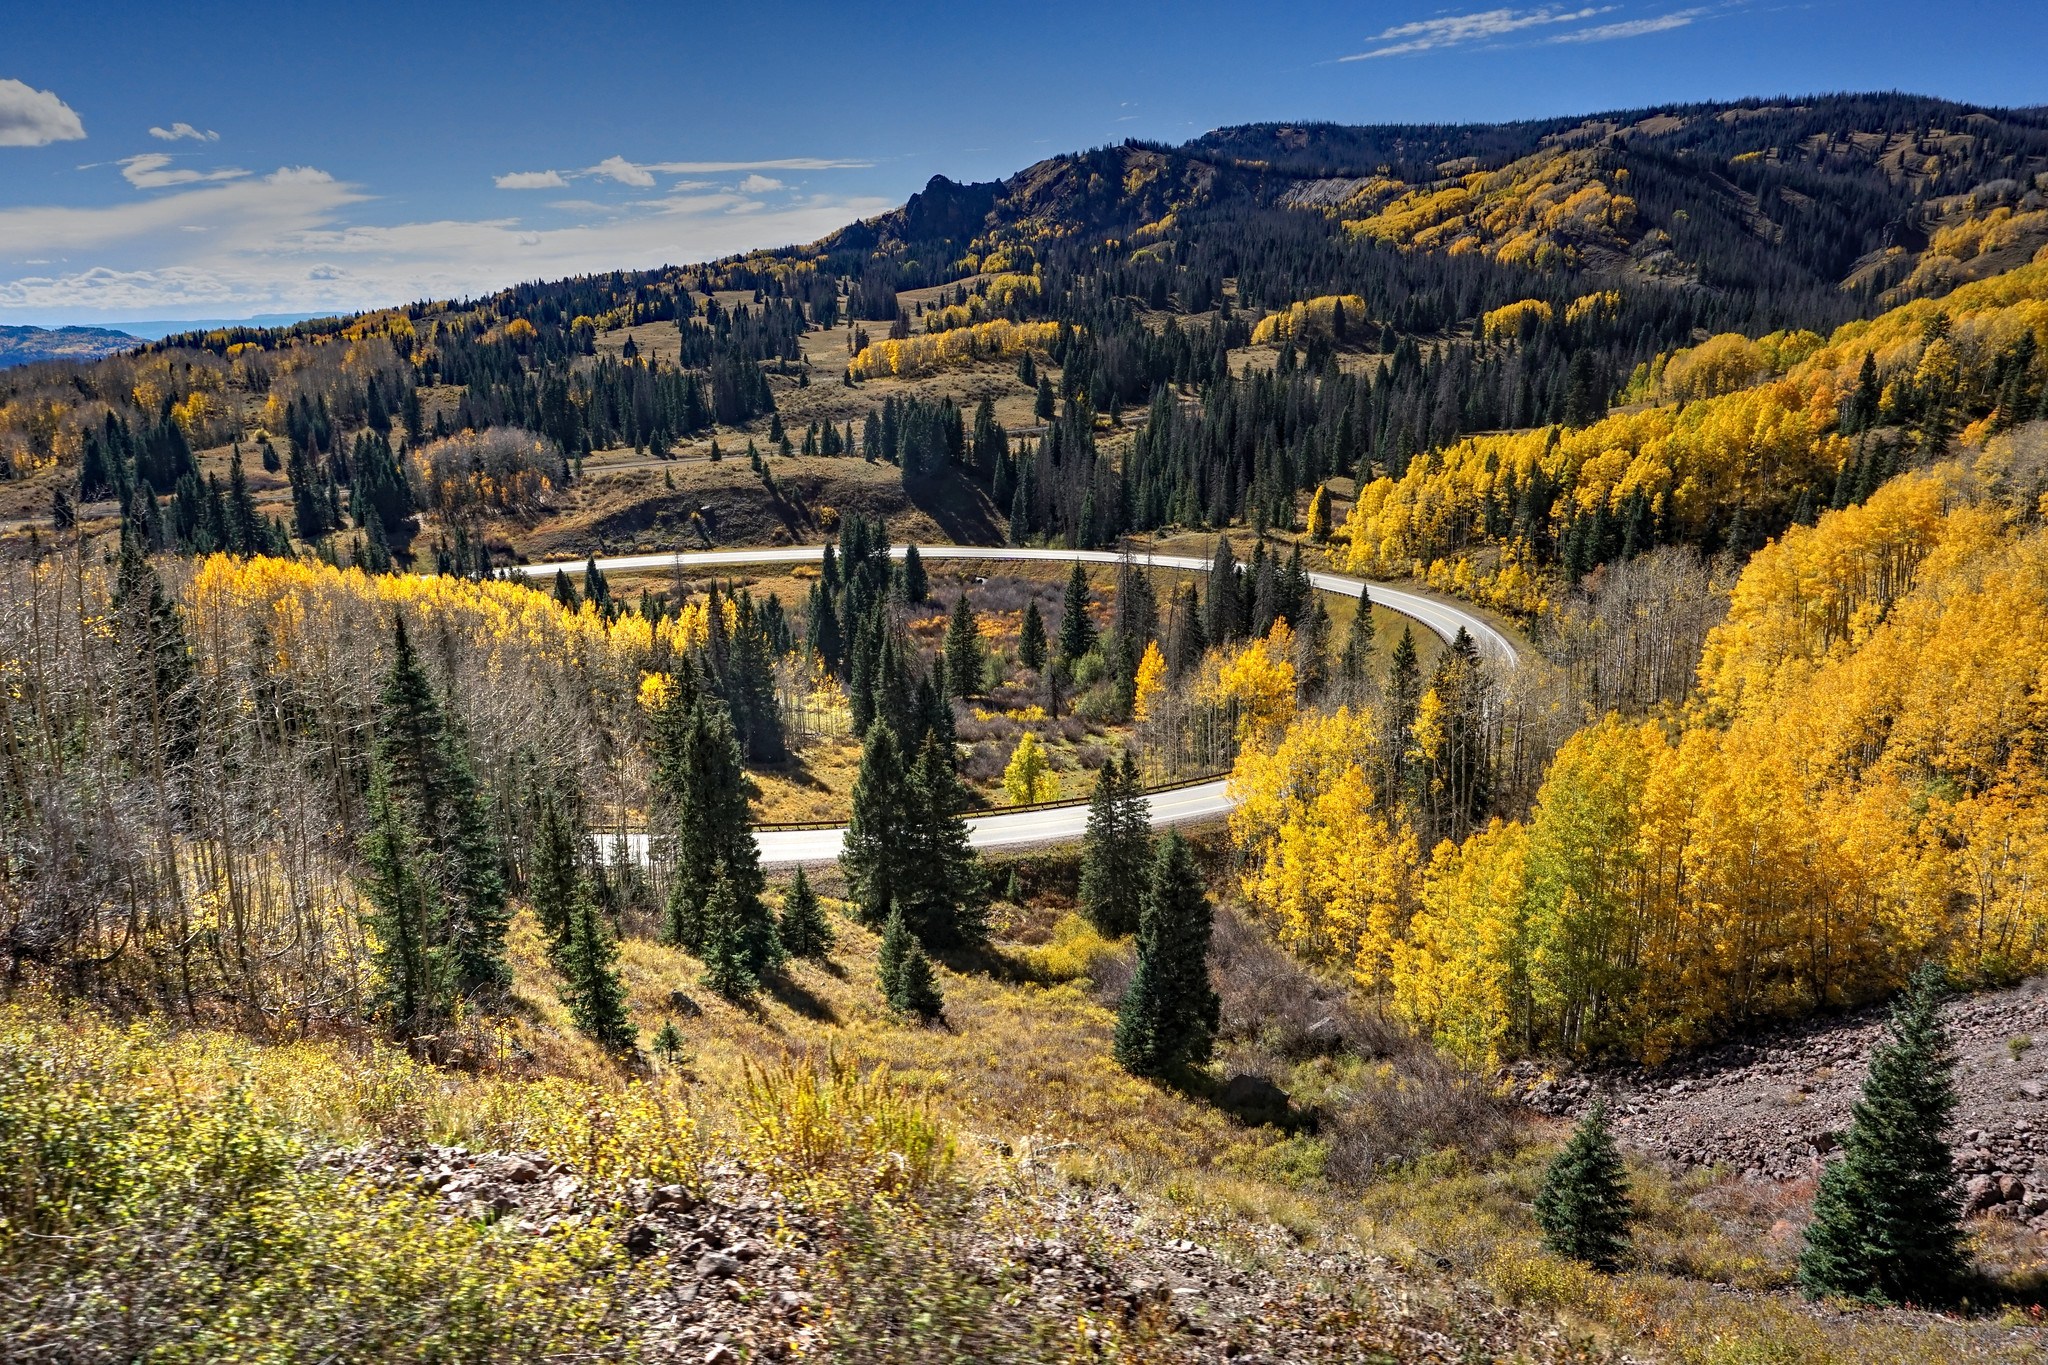 Things to do in Aspen